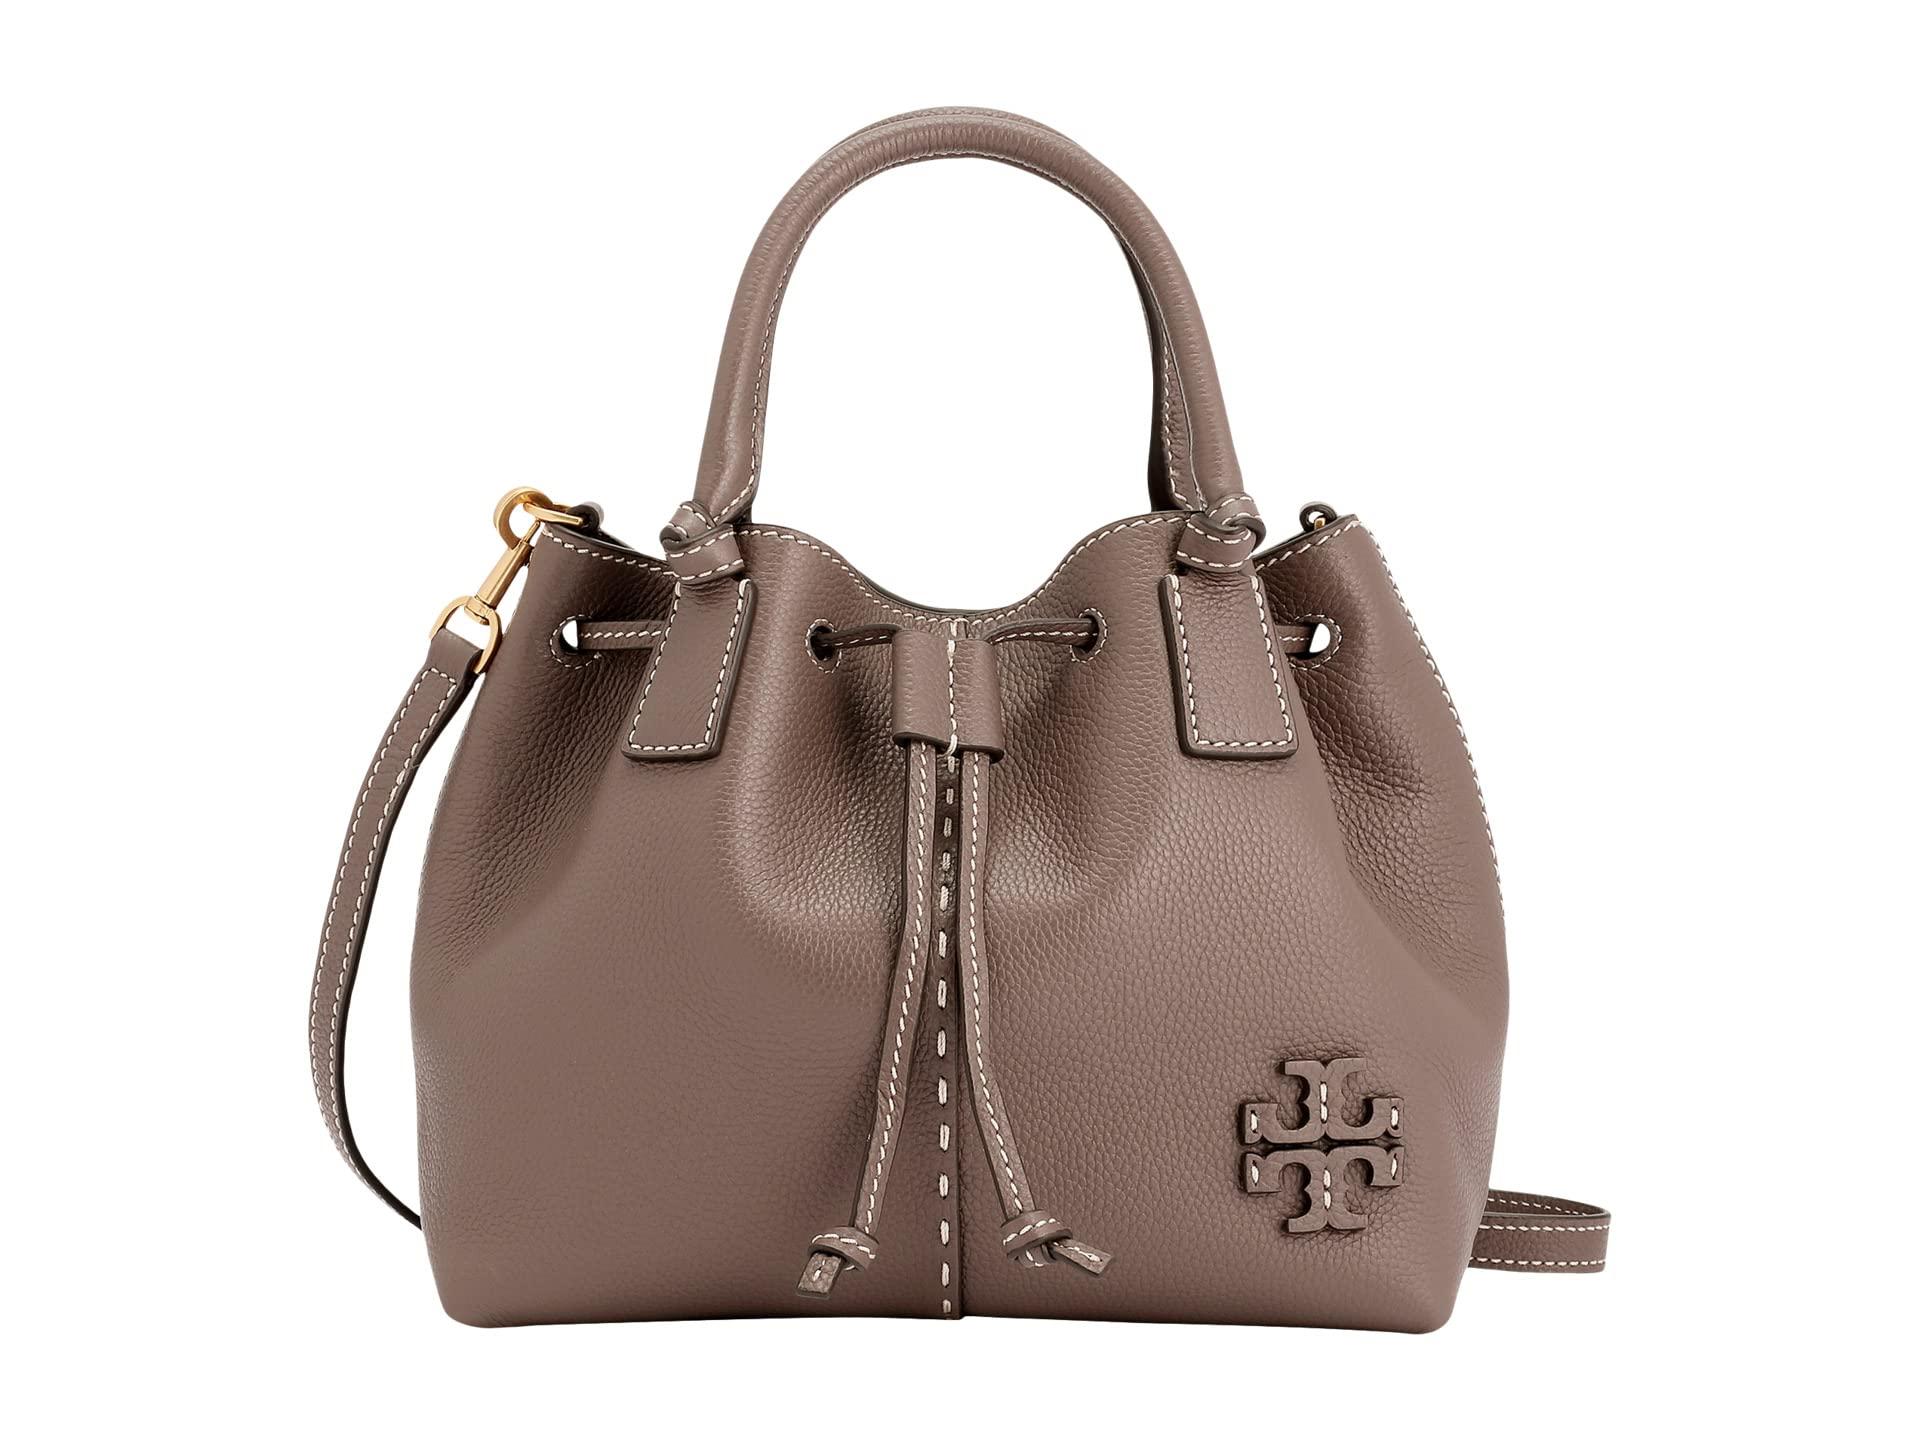 Tory Burch Mcgraw Small Drawstring Satchel in Natural | Lyst